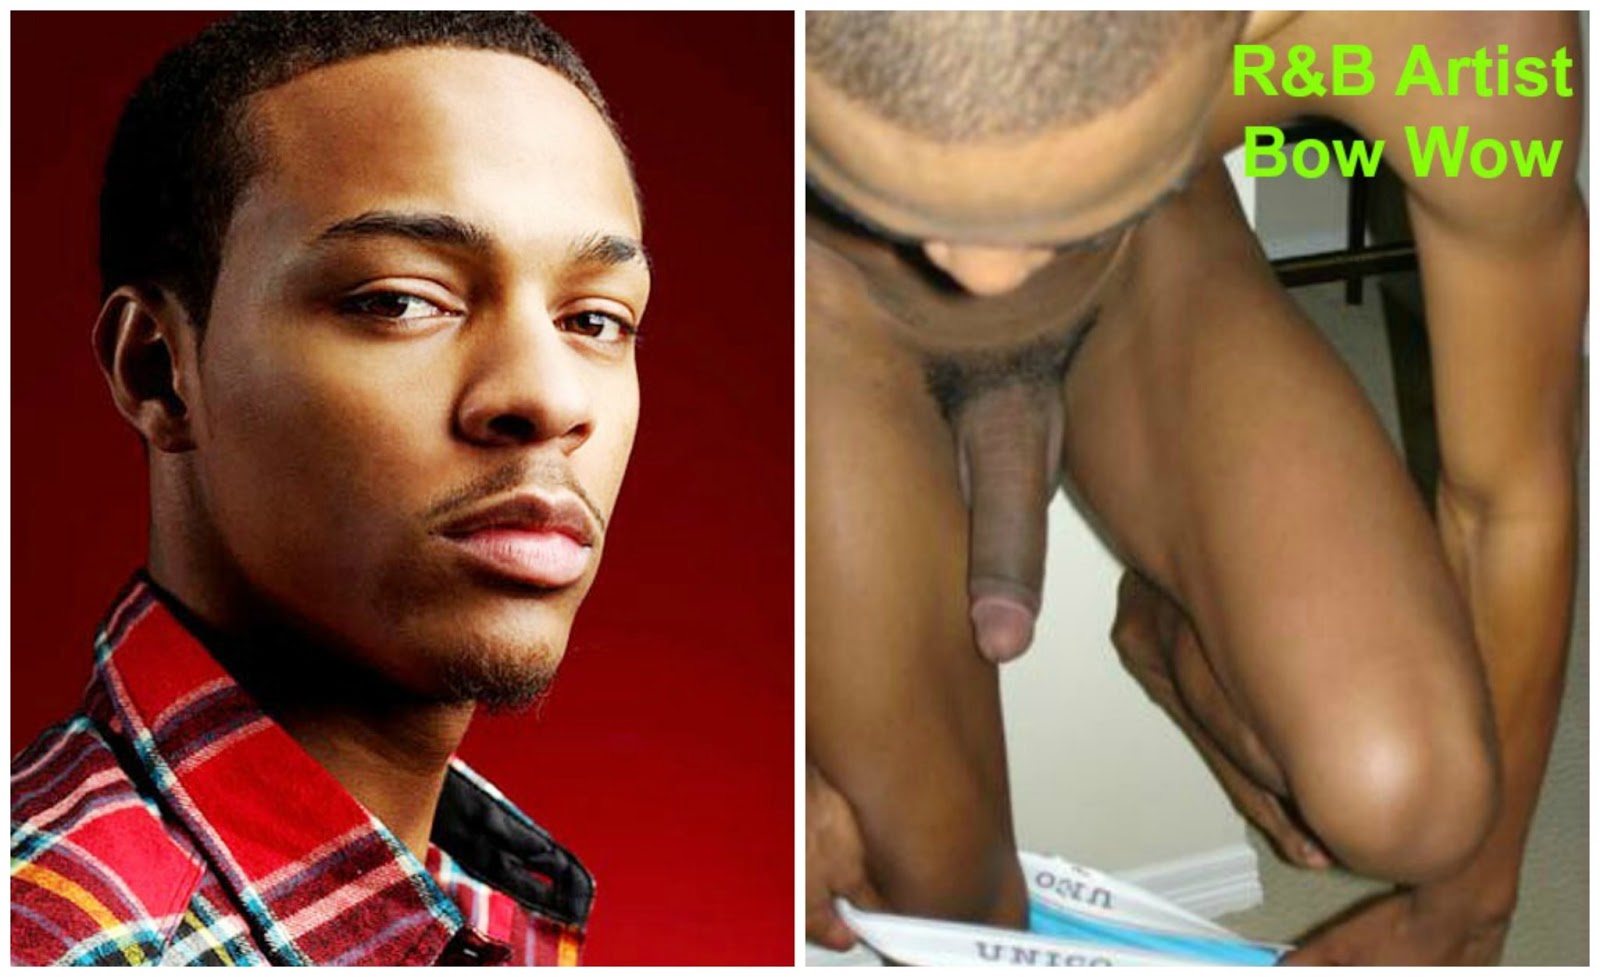 Bow wow sucking dick